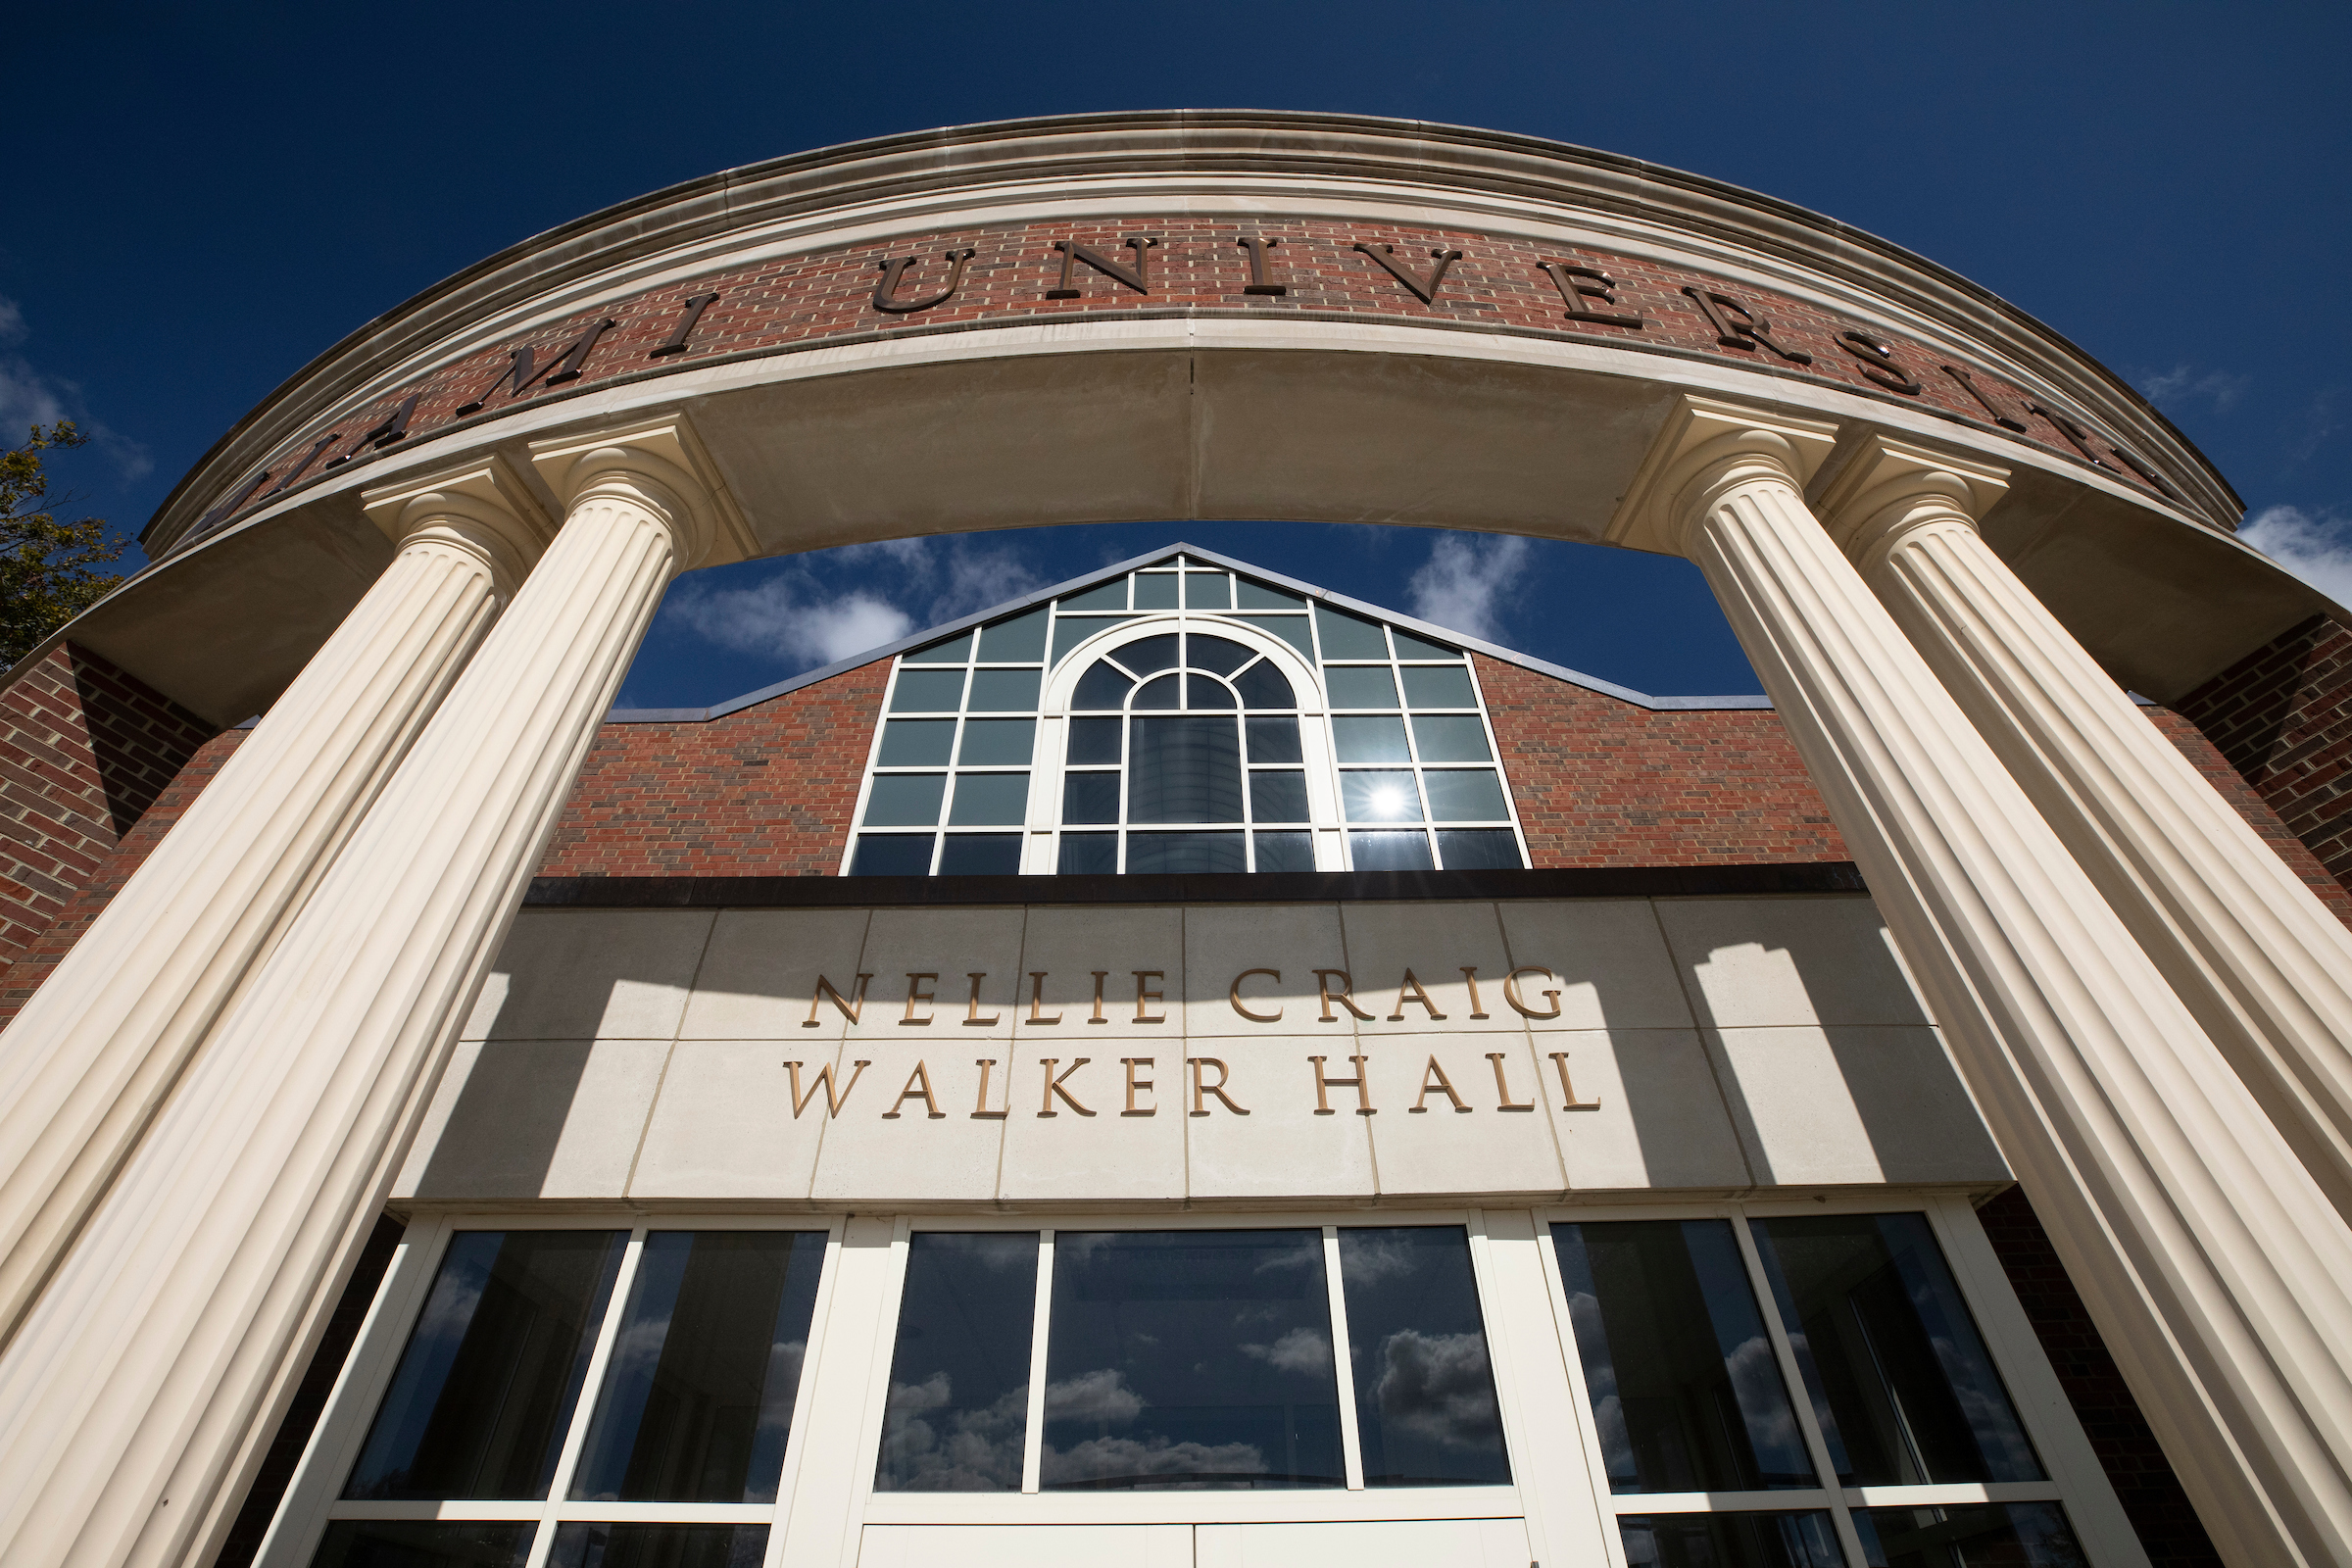 An image of Nellie Craig Walker Hall.